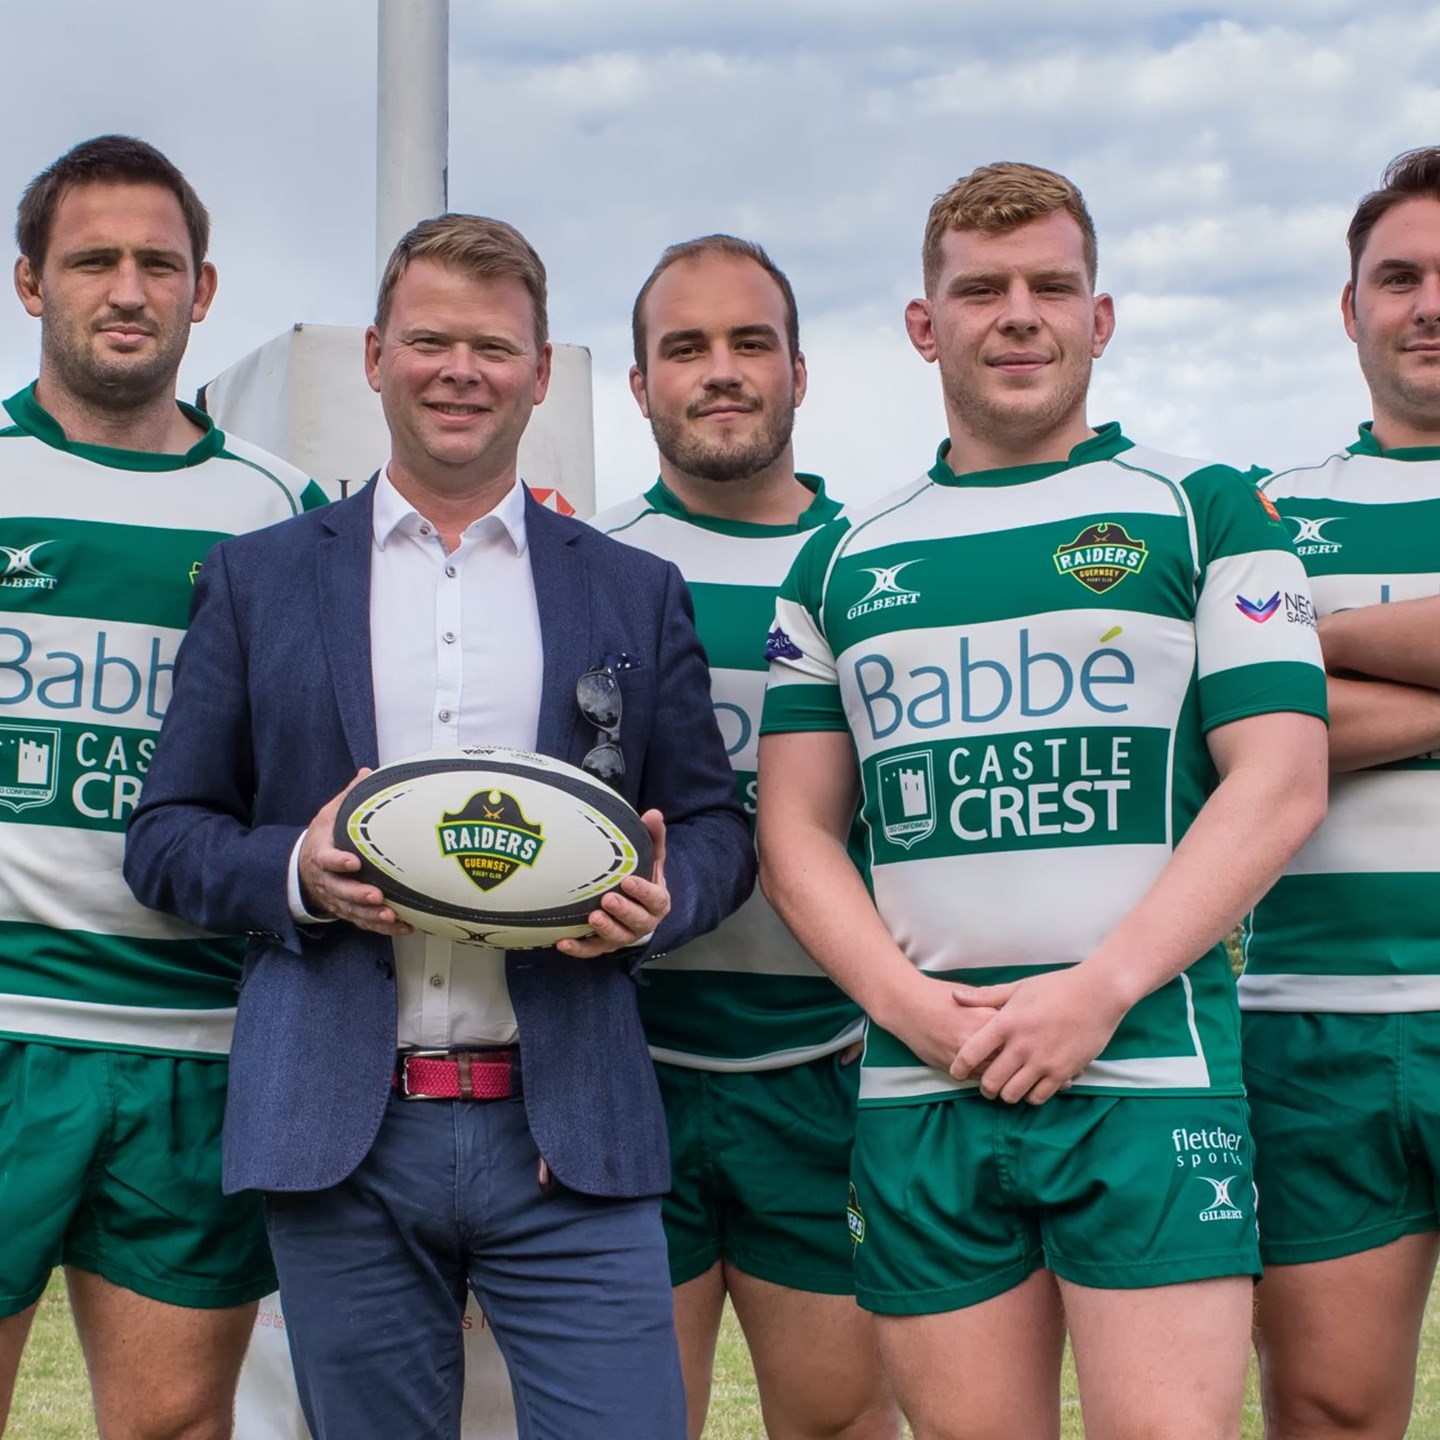 Matt Litten posing with 4 of the Guernsey Raiders rugby team on the Rugby field